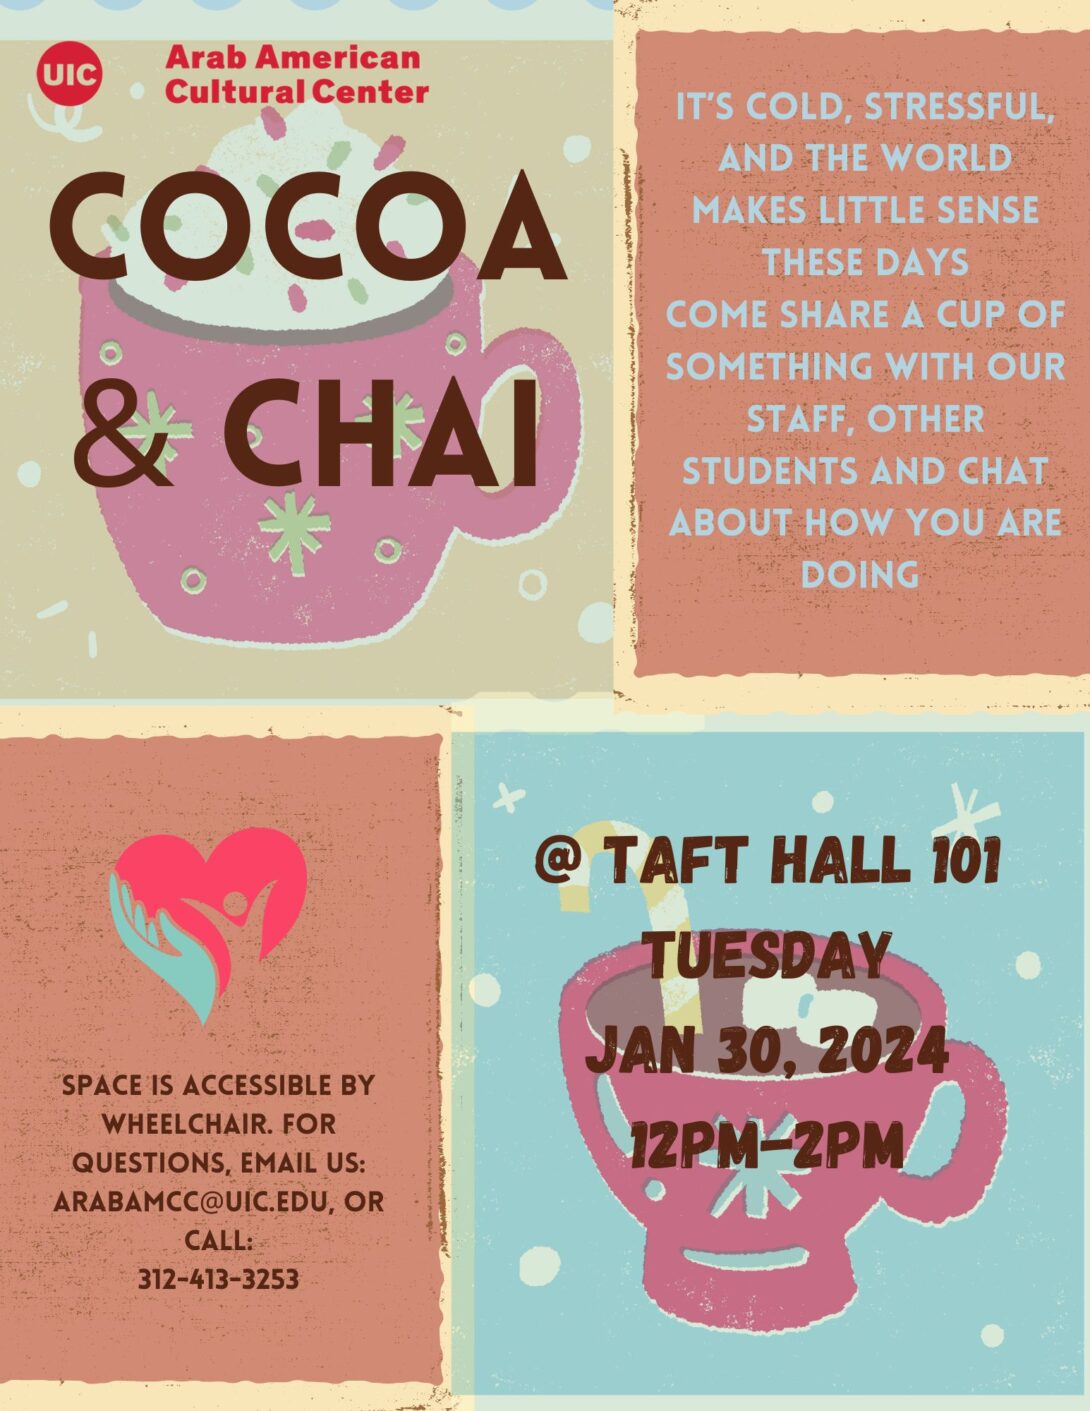 Flyer is split into four somewhat equal rectangles. On the top right is a light orange square with light blue text. Next to it on the left is a light green square with a drawing of a pink mug with whipped cream and sprinkles on top and text in dark brown. On the bottom right is a light blue square with a pink mug with two white marshmallows and a candy cane inside it and text in brown. Next to it on the left is a light orange box with text in brown and a drawing of a hand holding a heart.